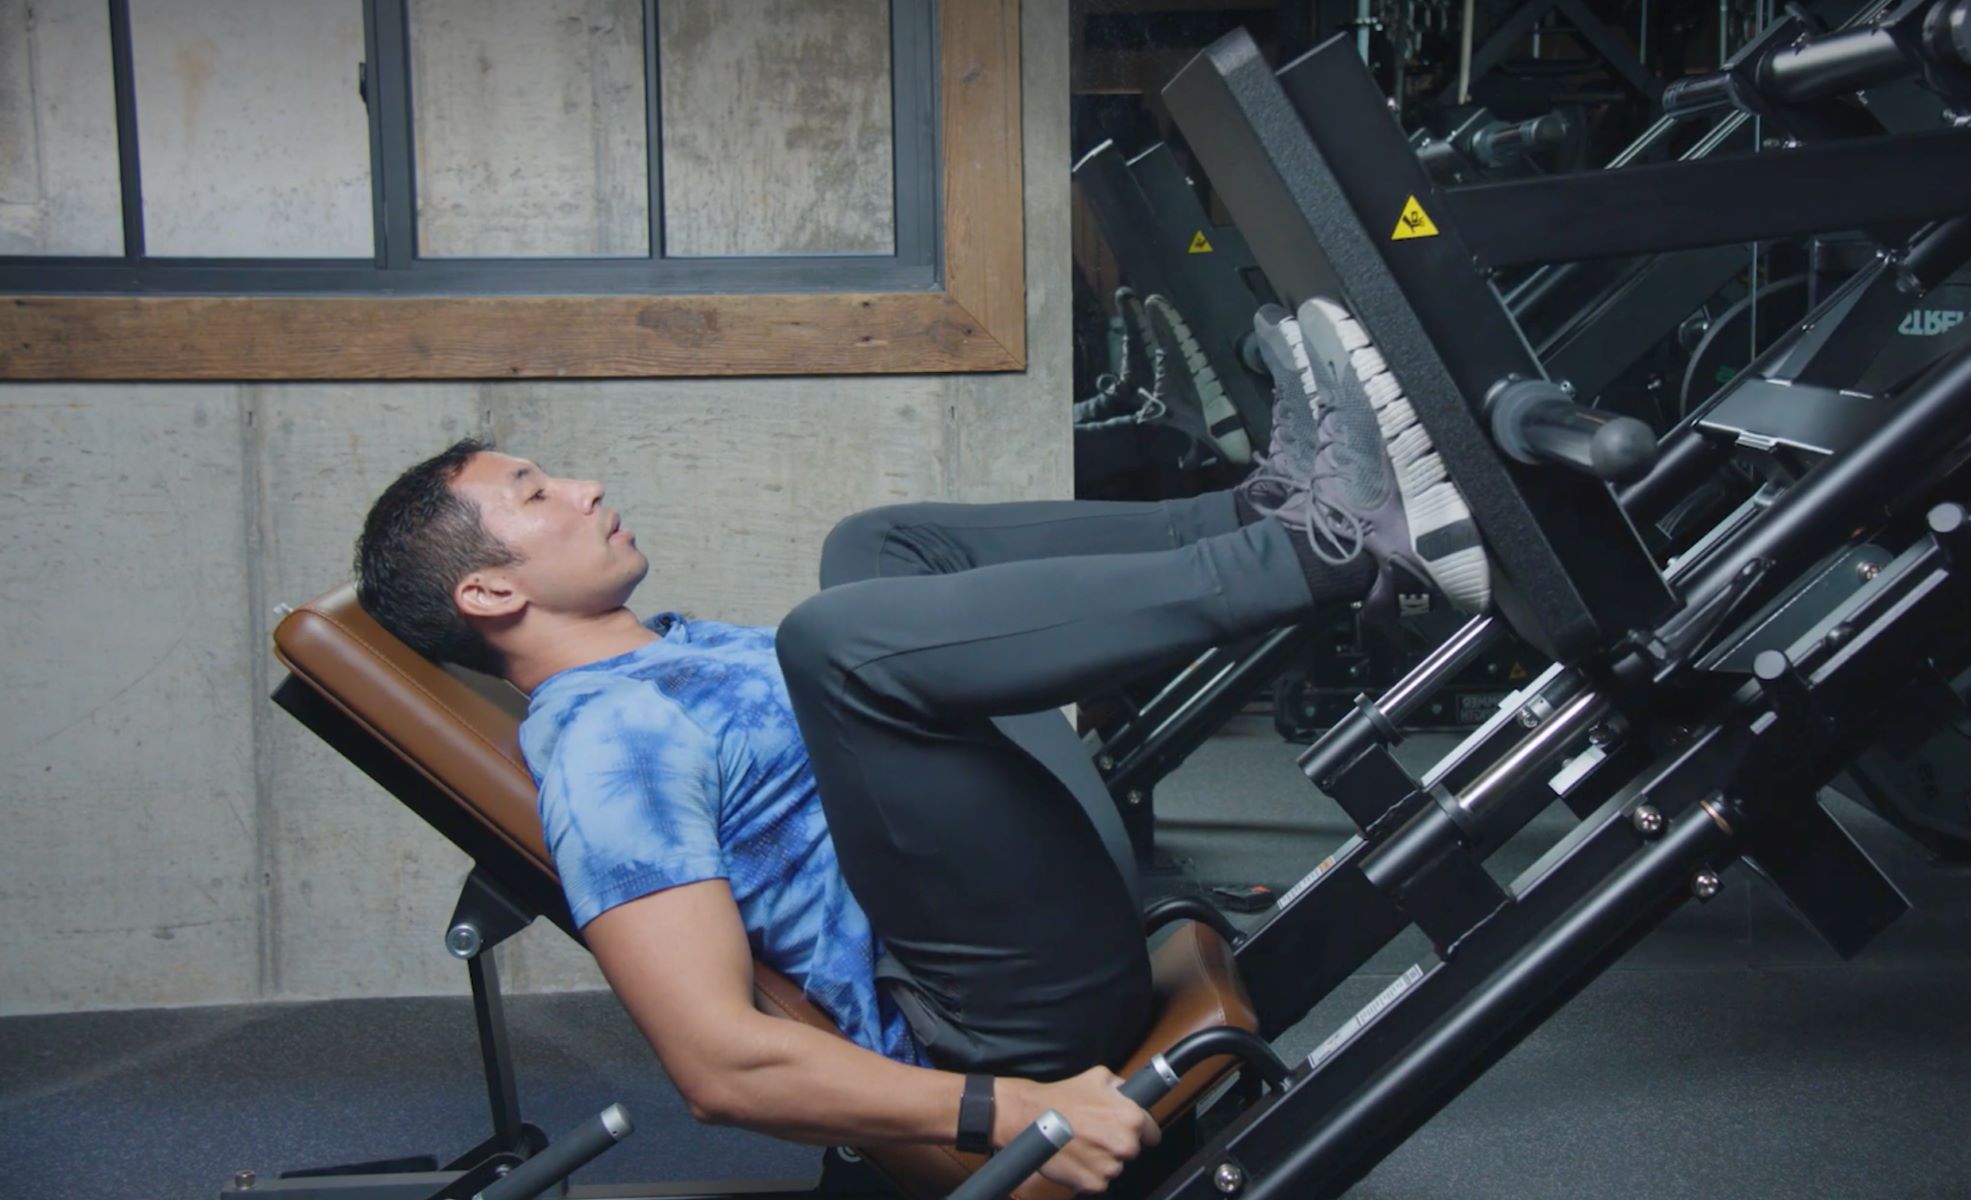 The Surprising Weight Of A Leg Press Machine Revealed!